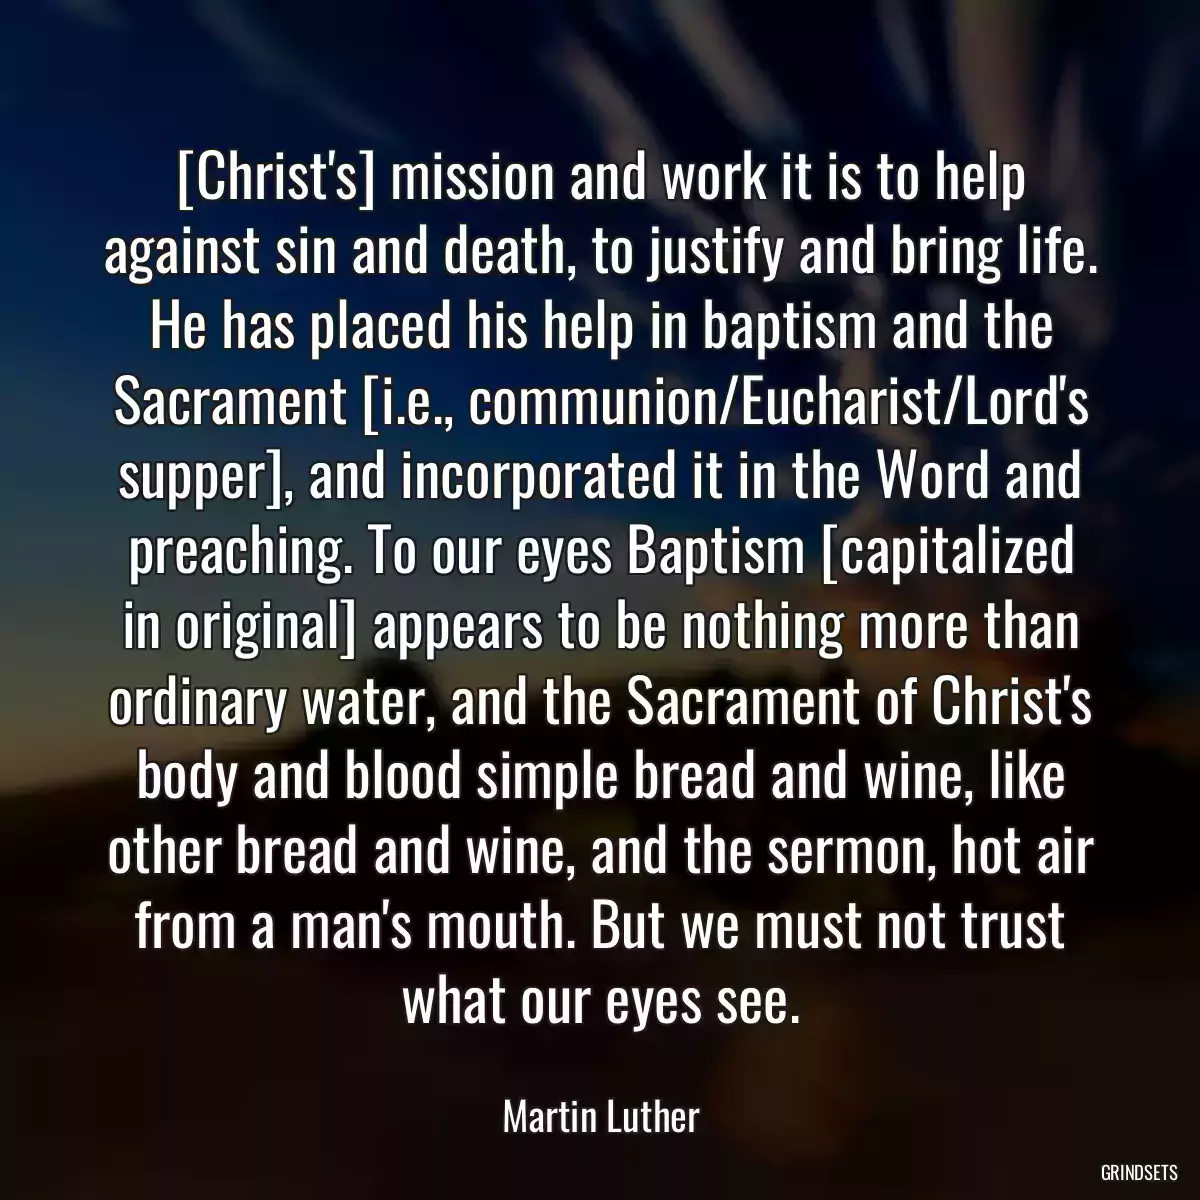 [Christ\'s] mission and work it is to help against sin and death, to justify and bring life. He has placed his help in baptism and the Sacrament [i.e., communion/Eucharist/Lord\'s supper], and incorporated it in the Word and preaching. To our eyes Baptism [capitalized in original] appears to be nothing more than ordinary water, and the Sacrament of Christ\'s body and blood simple bread and wine, like other bread and wine, and the sermon, hot air from a man\'s mouth. But we must not trust what our eyes see.